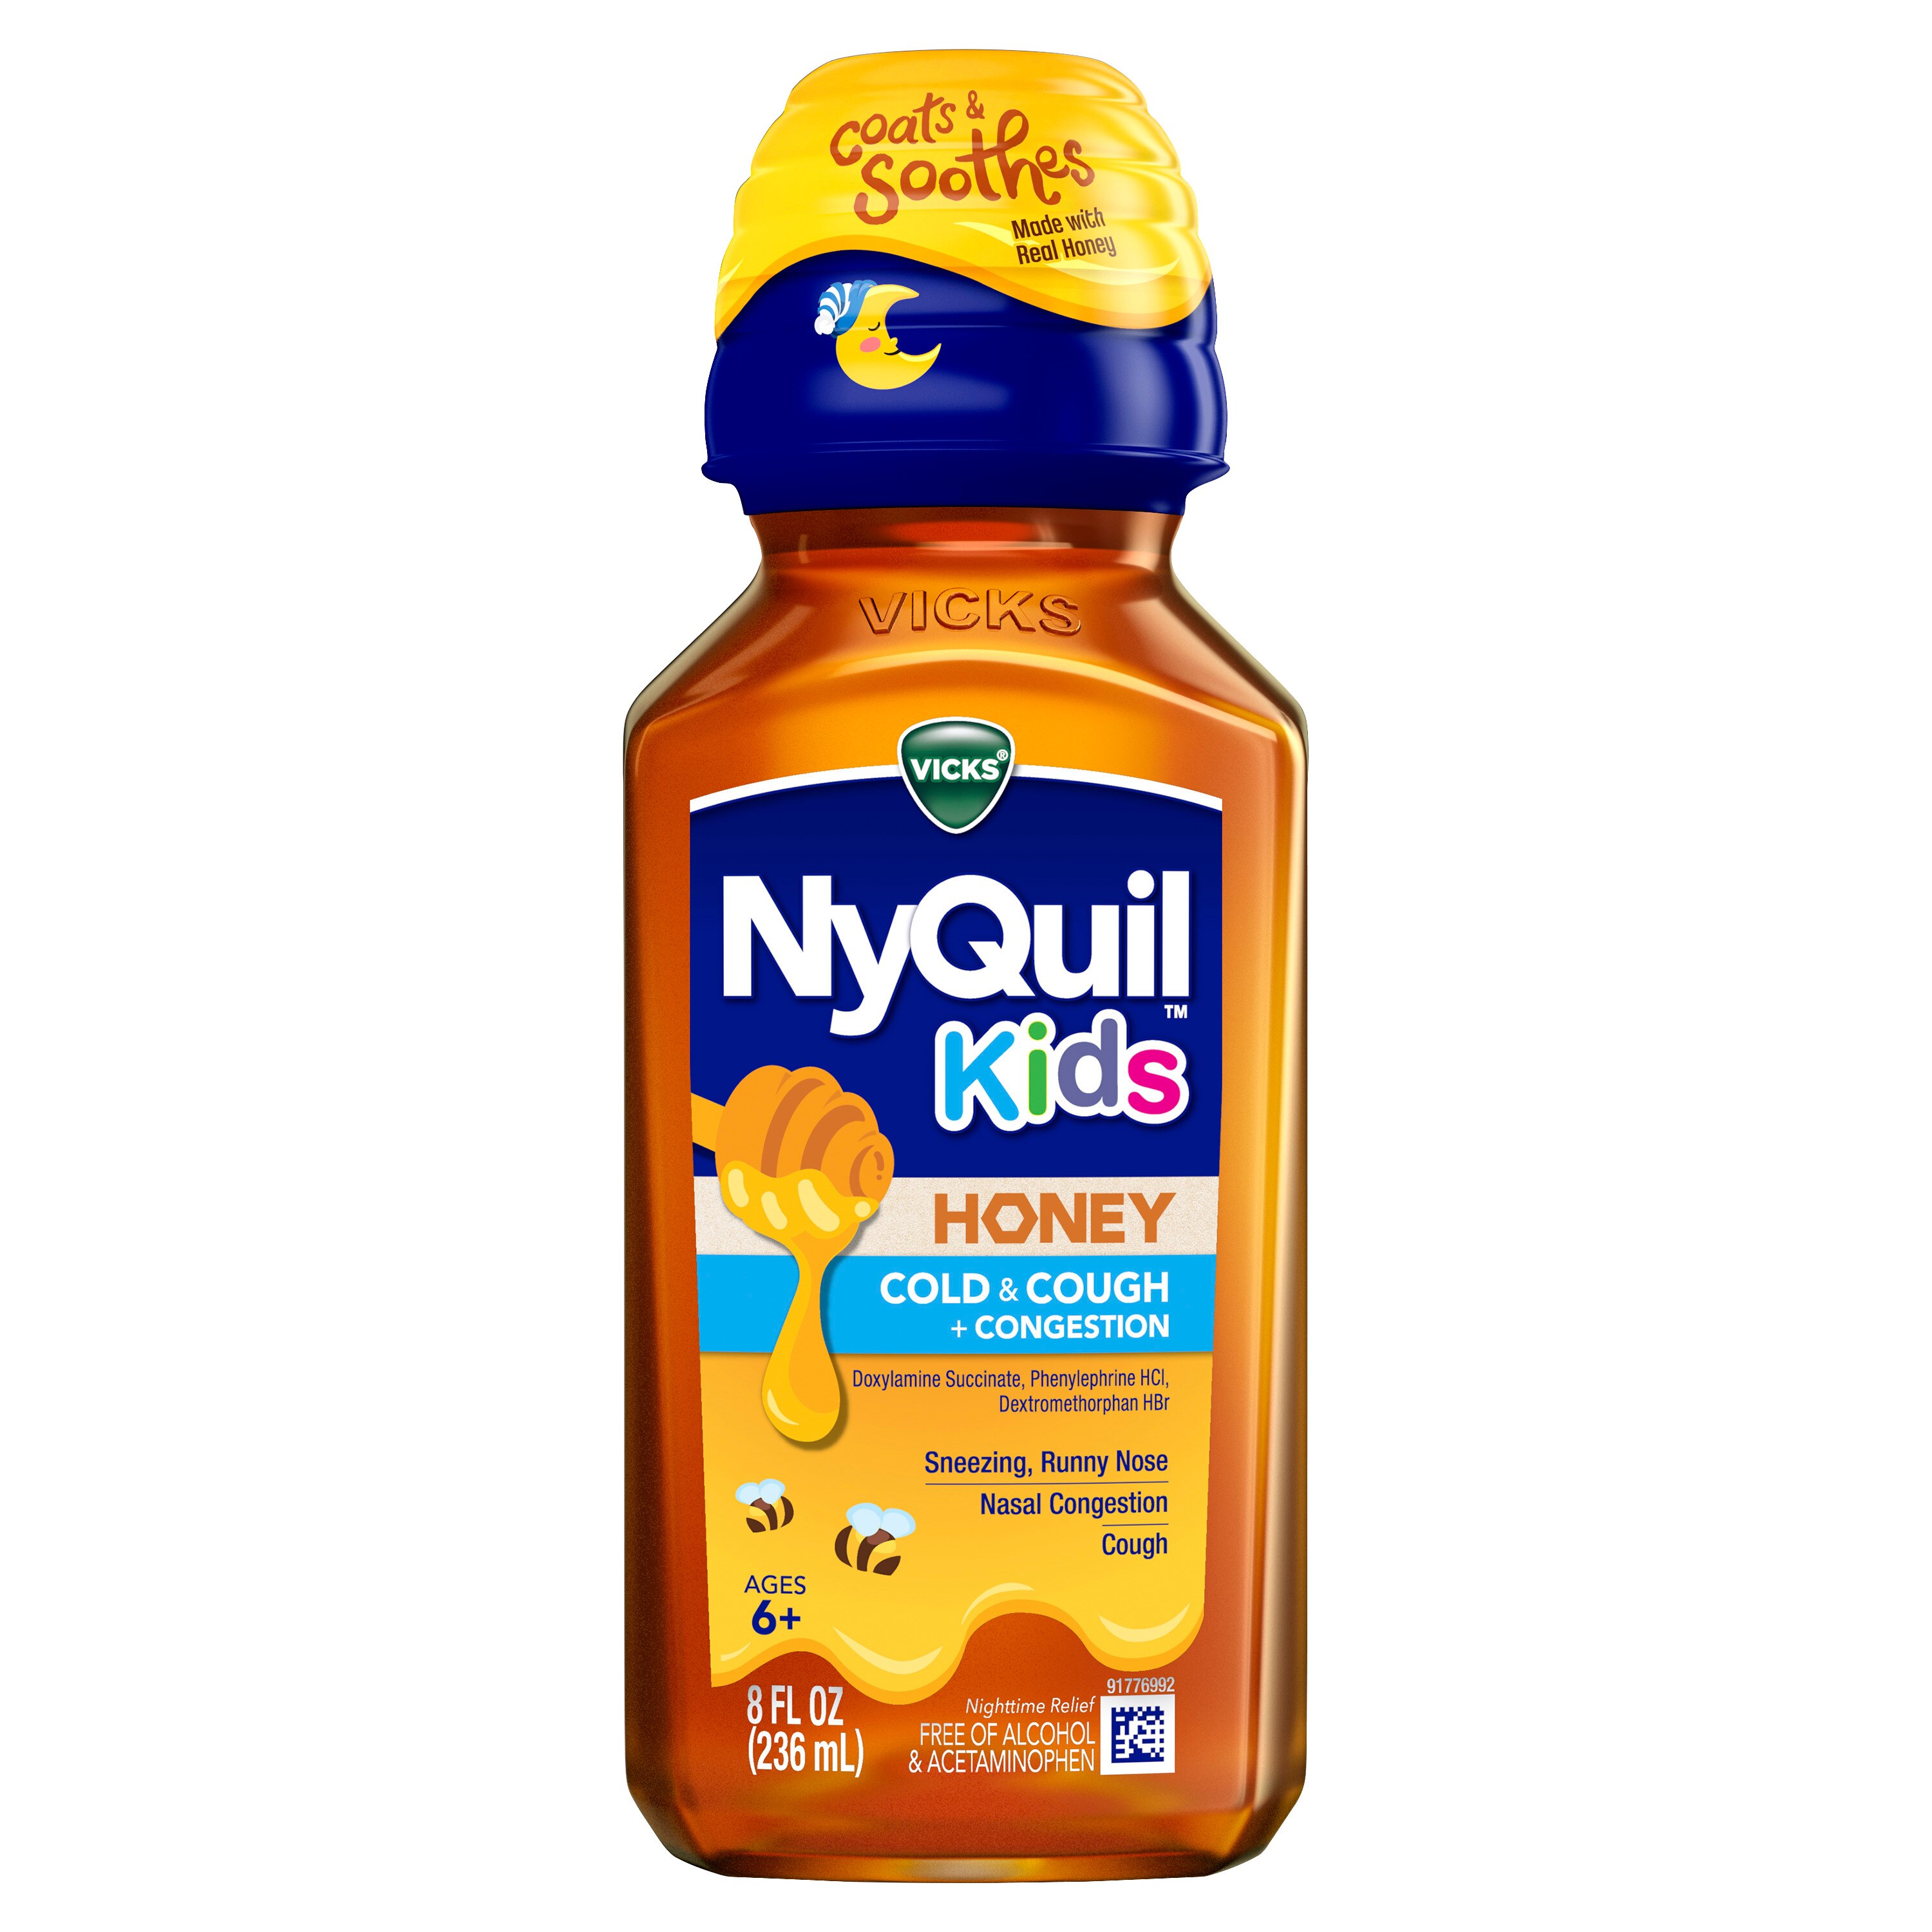 Vicks NyQuil Kids Cold and Cough + Congestion Relief Made With Real Honey  For Kids 6+, 8 OZ - CVS Pharmacy